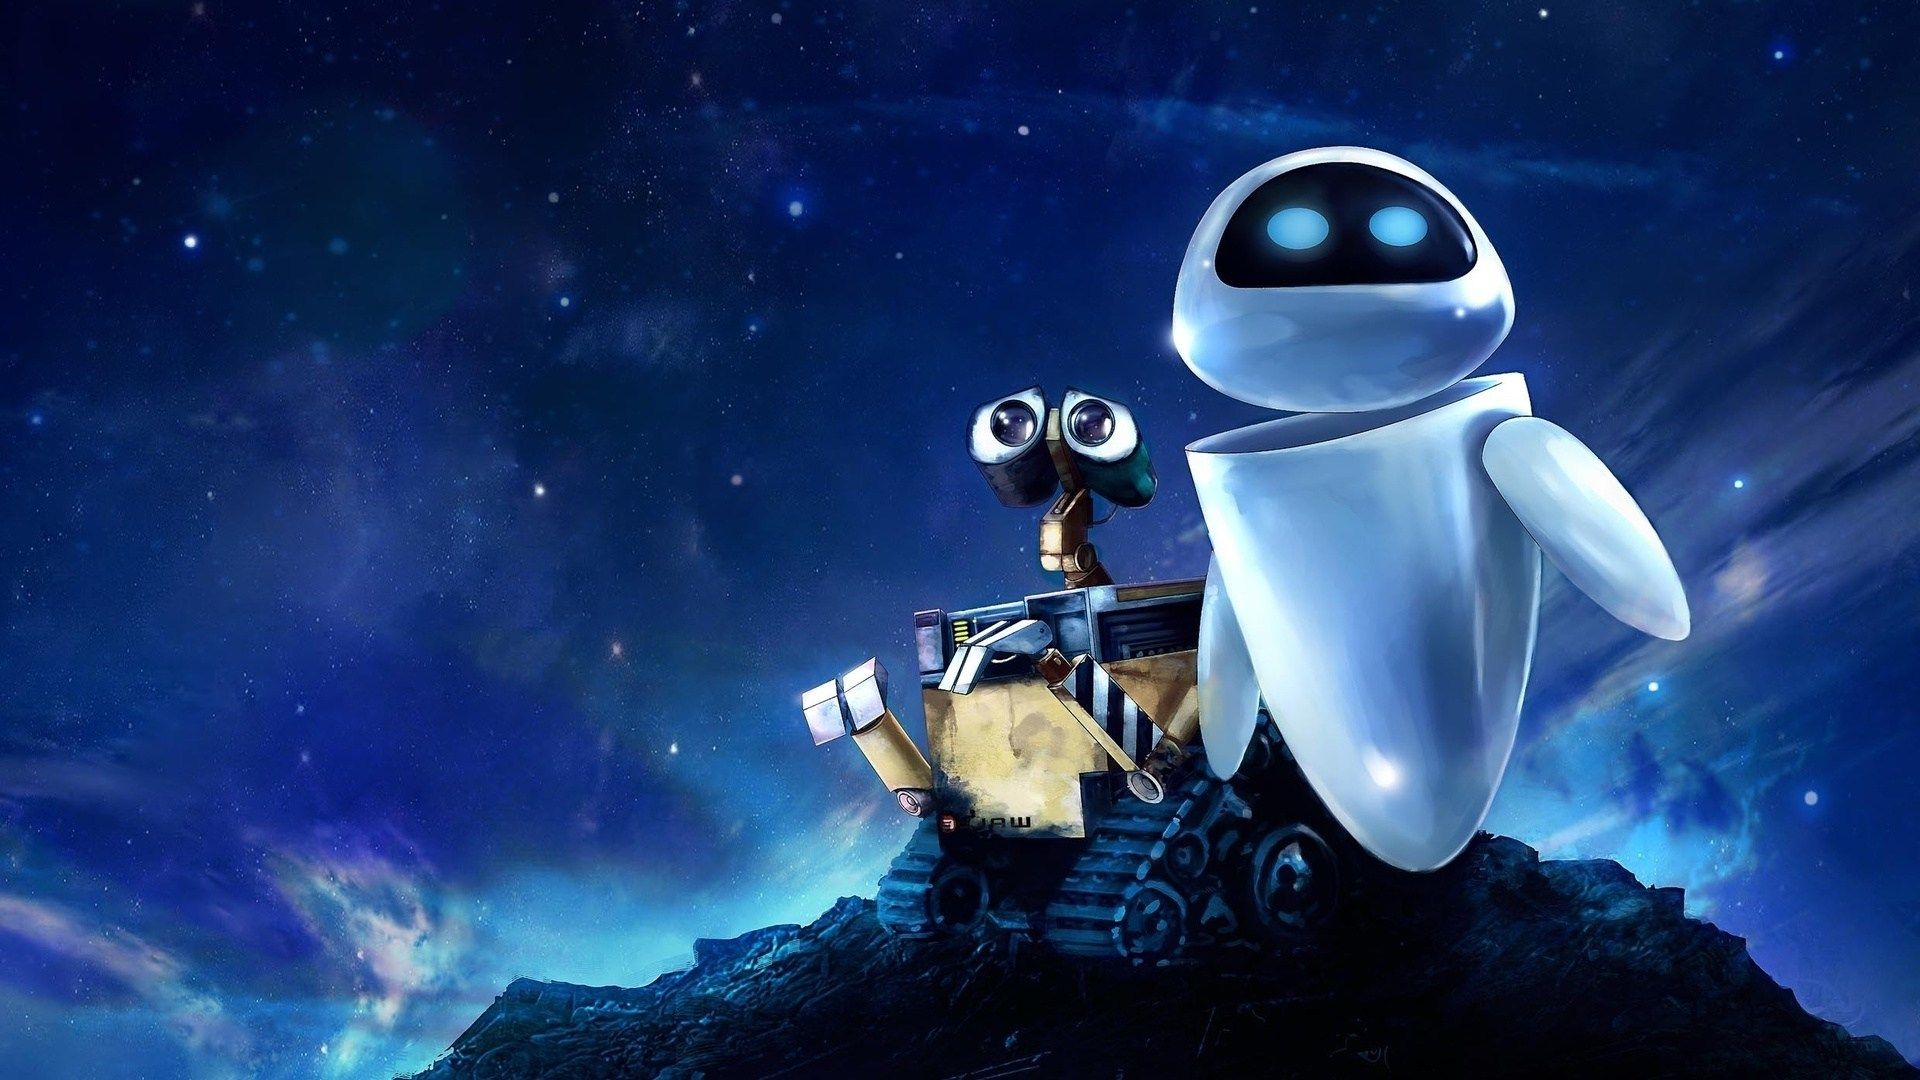 Vintage Wedding Decorations: Wall E And Eve Wallpaper HD